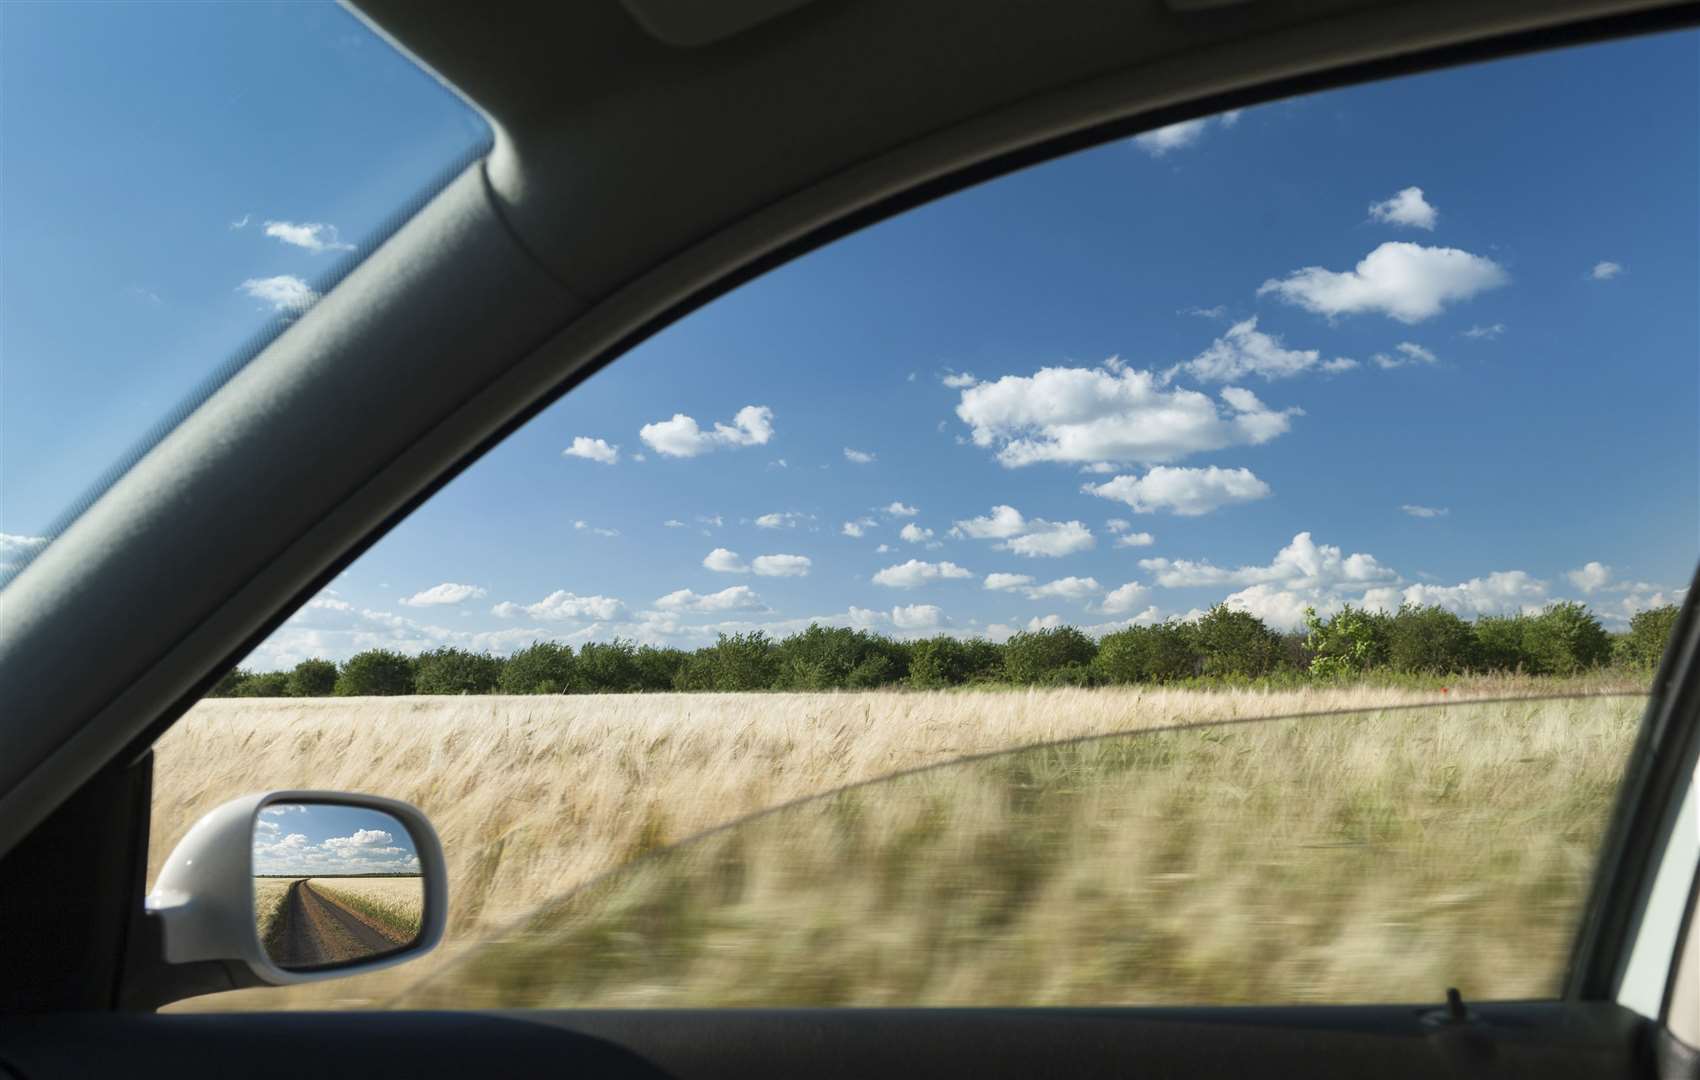 Driving with the car windows down is not advised for motorists with hay fever